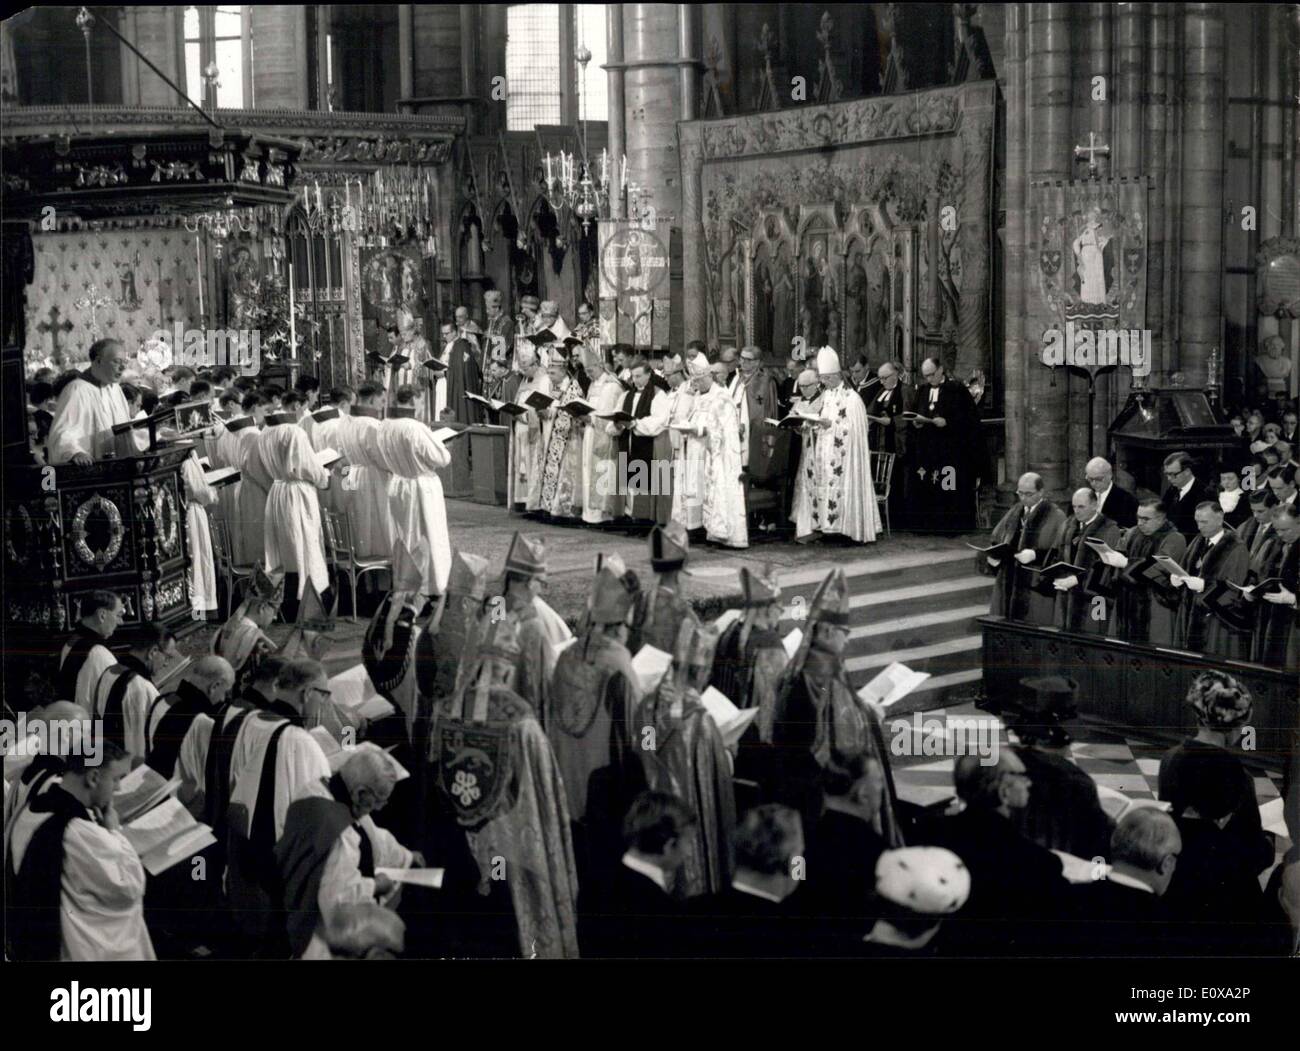 Dec. 28, 1965 - Queen attends Westminster Abbey Inaugural Service ? H.M. The Queen today attended the inaugural service at Westminster Abbey for the celebrations commemorating the 900th anniversary of the Abbey?s consecration. Other members of the Royal Family also attended. Photo Shows: The scene inside Westminster Abbey this morning, during the service. H/Keystone Stock Photo